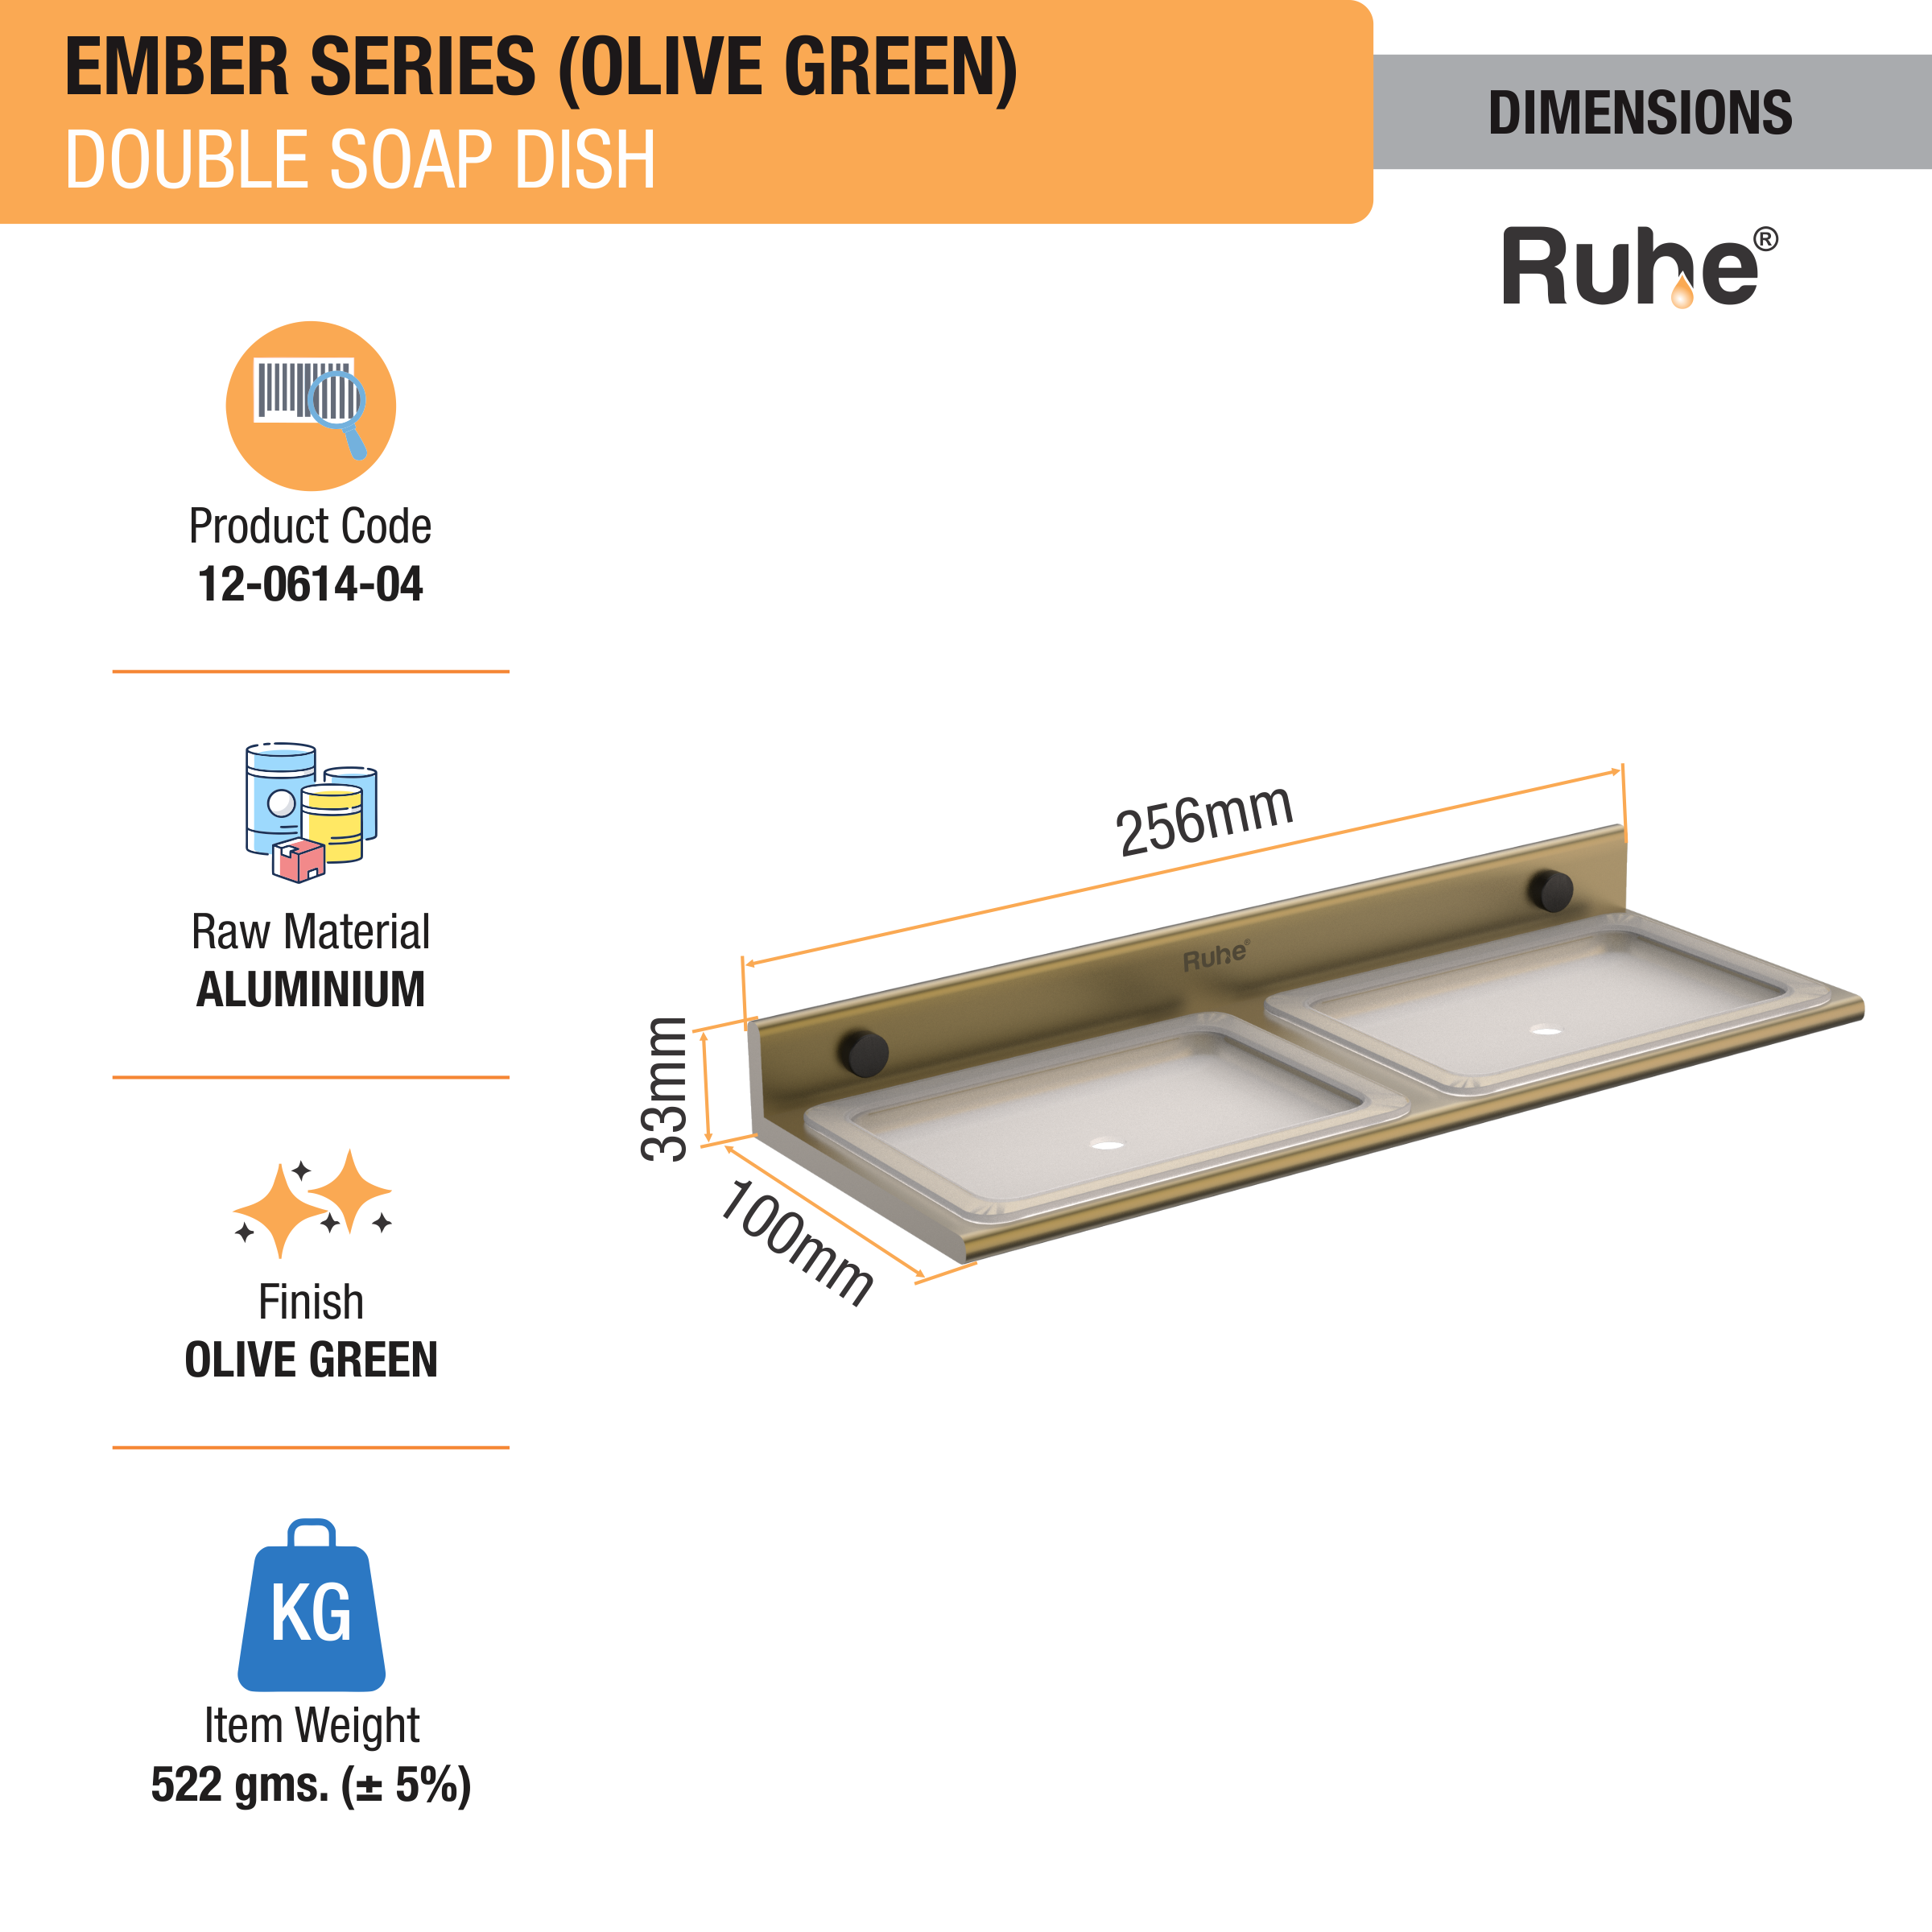 Ember Olive Green Double Soap Dish (Space Aluminium) dimensions and sizes